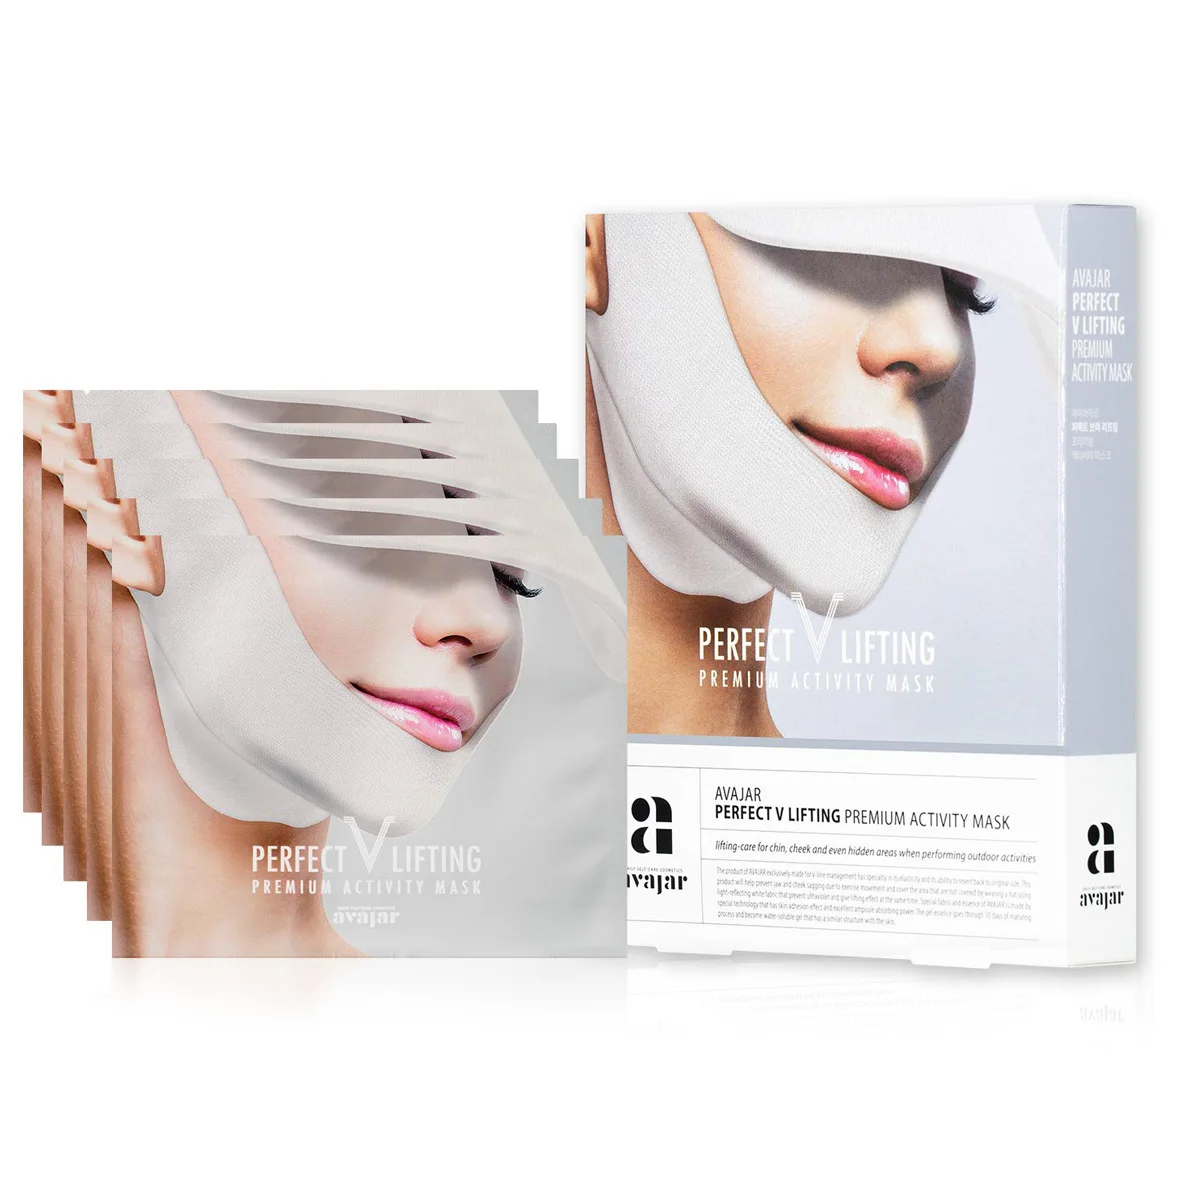 Avajar Perfect V Lifting Premium Plus+ Mask 5pcs - Face Lifting Mask | Neck  Slimmer | V Line Mask | Face Slimmer | Chin Strap For Double Chin Remover